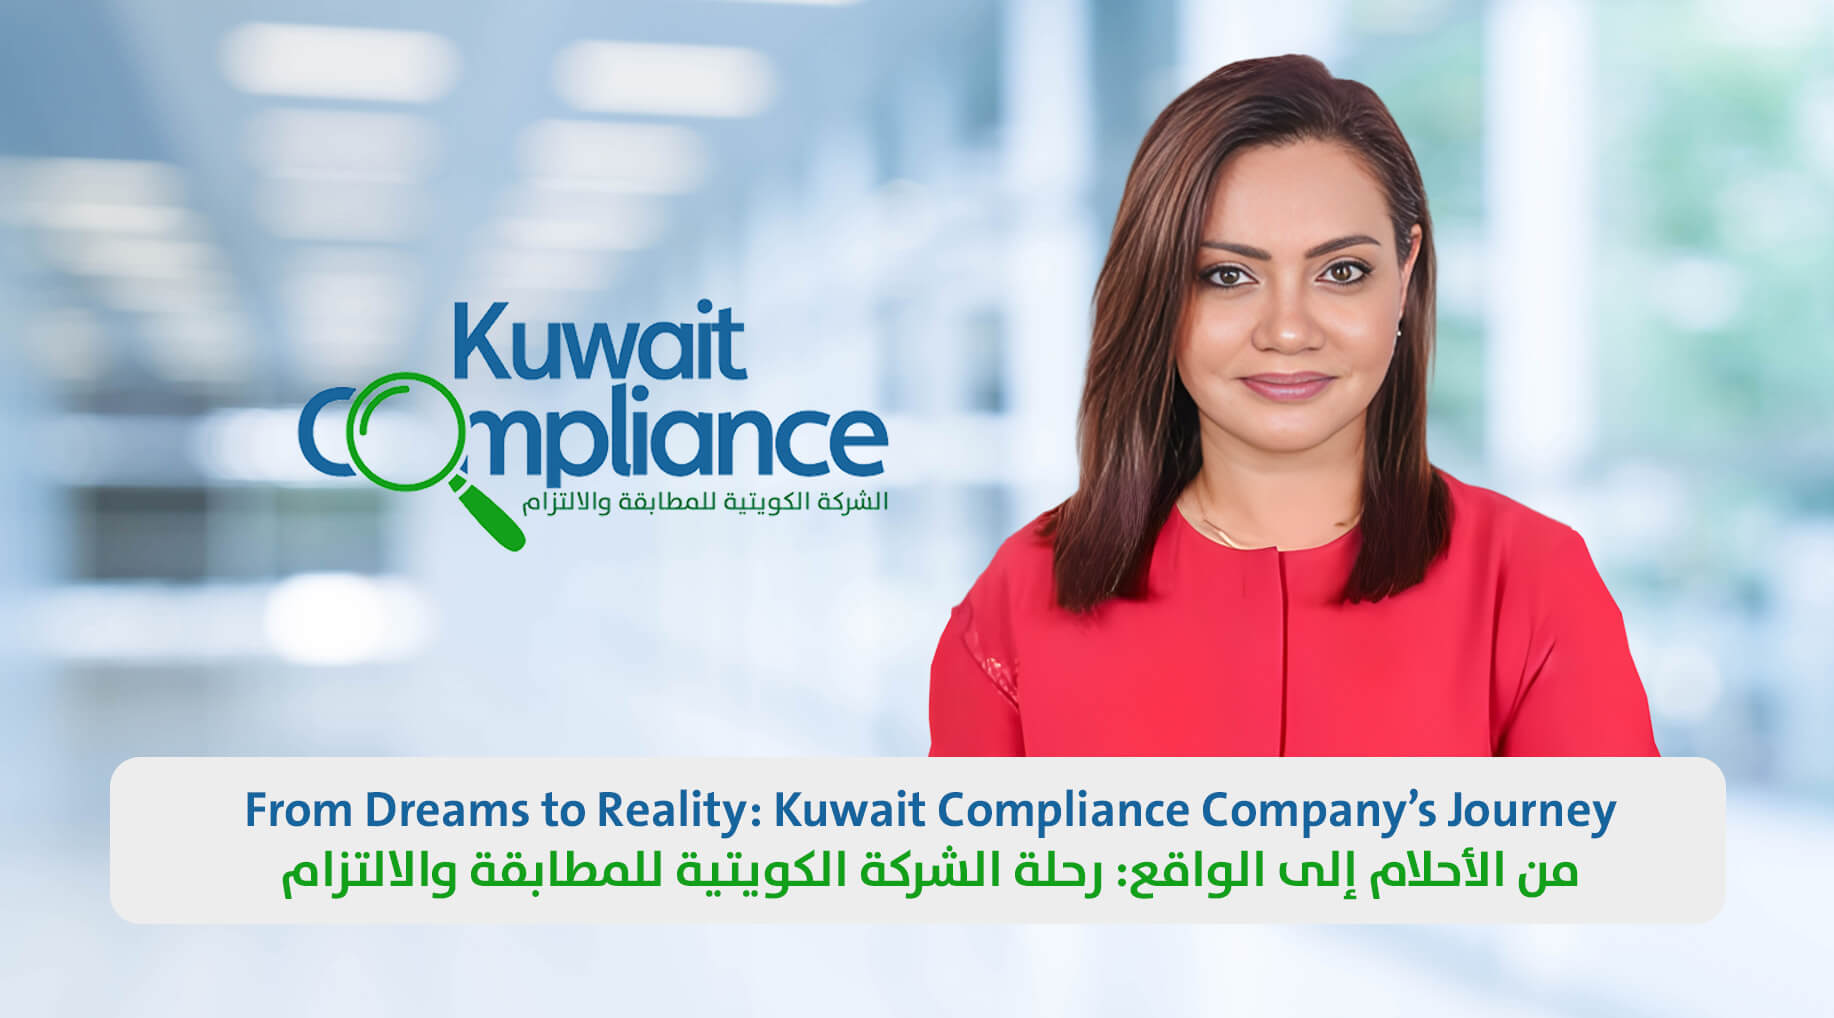 From Dream to Reality: The Journey of the Kuwait Compliance Company